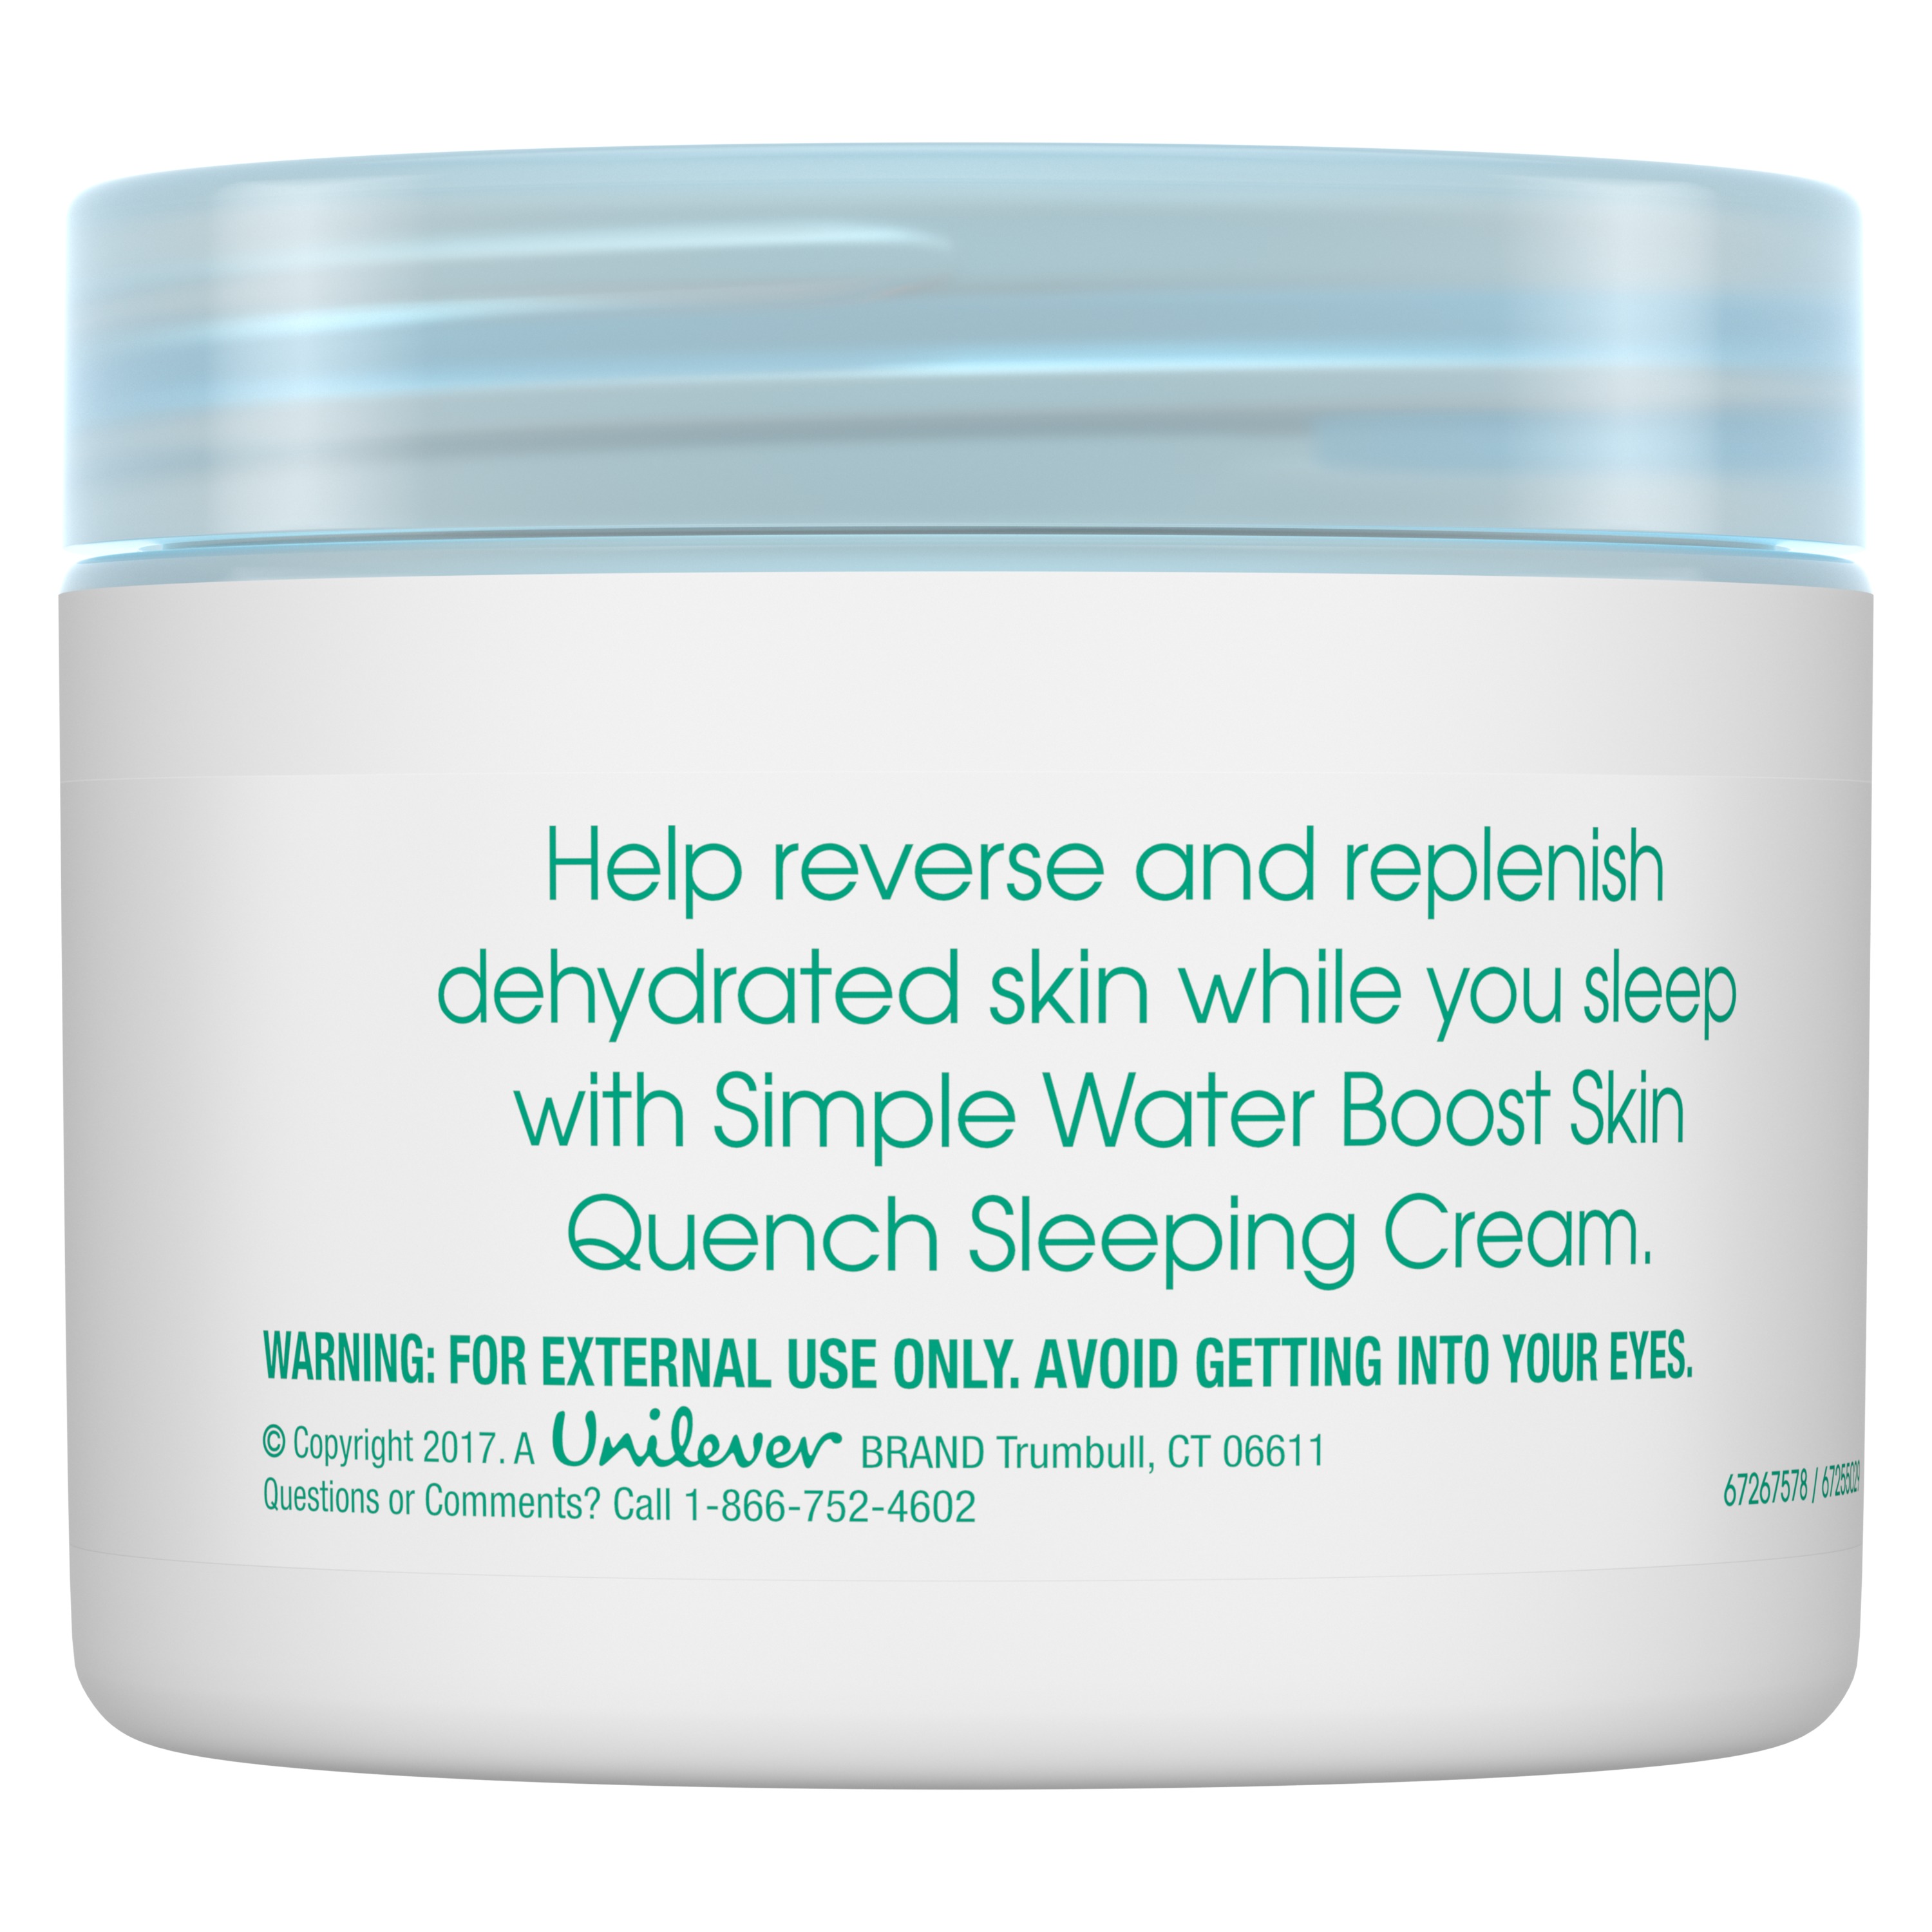 Simple Water Boost Skin Quench Sleeping Cream 1.7 oz - image 3 of 13